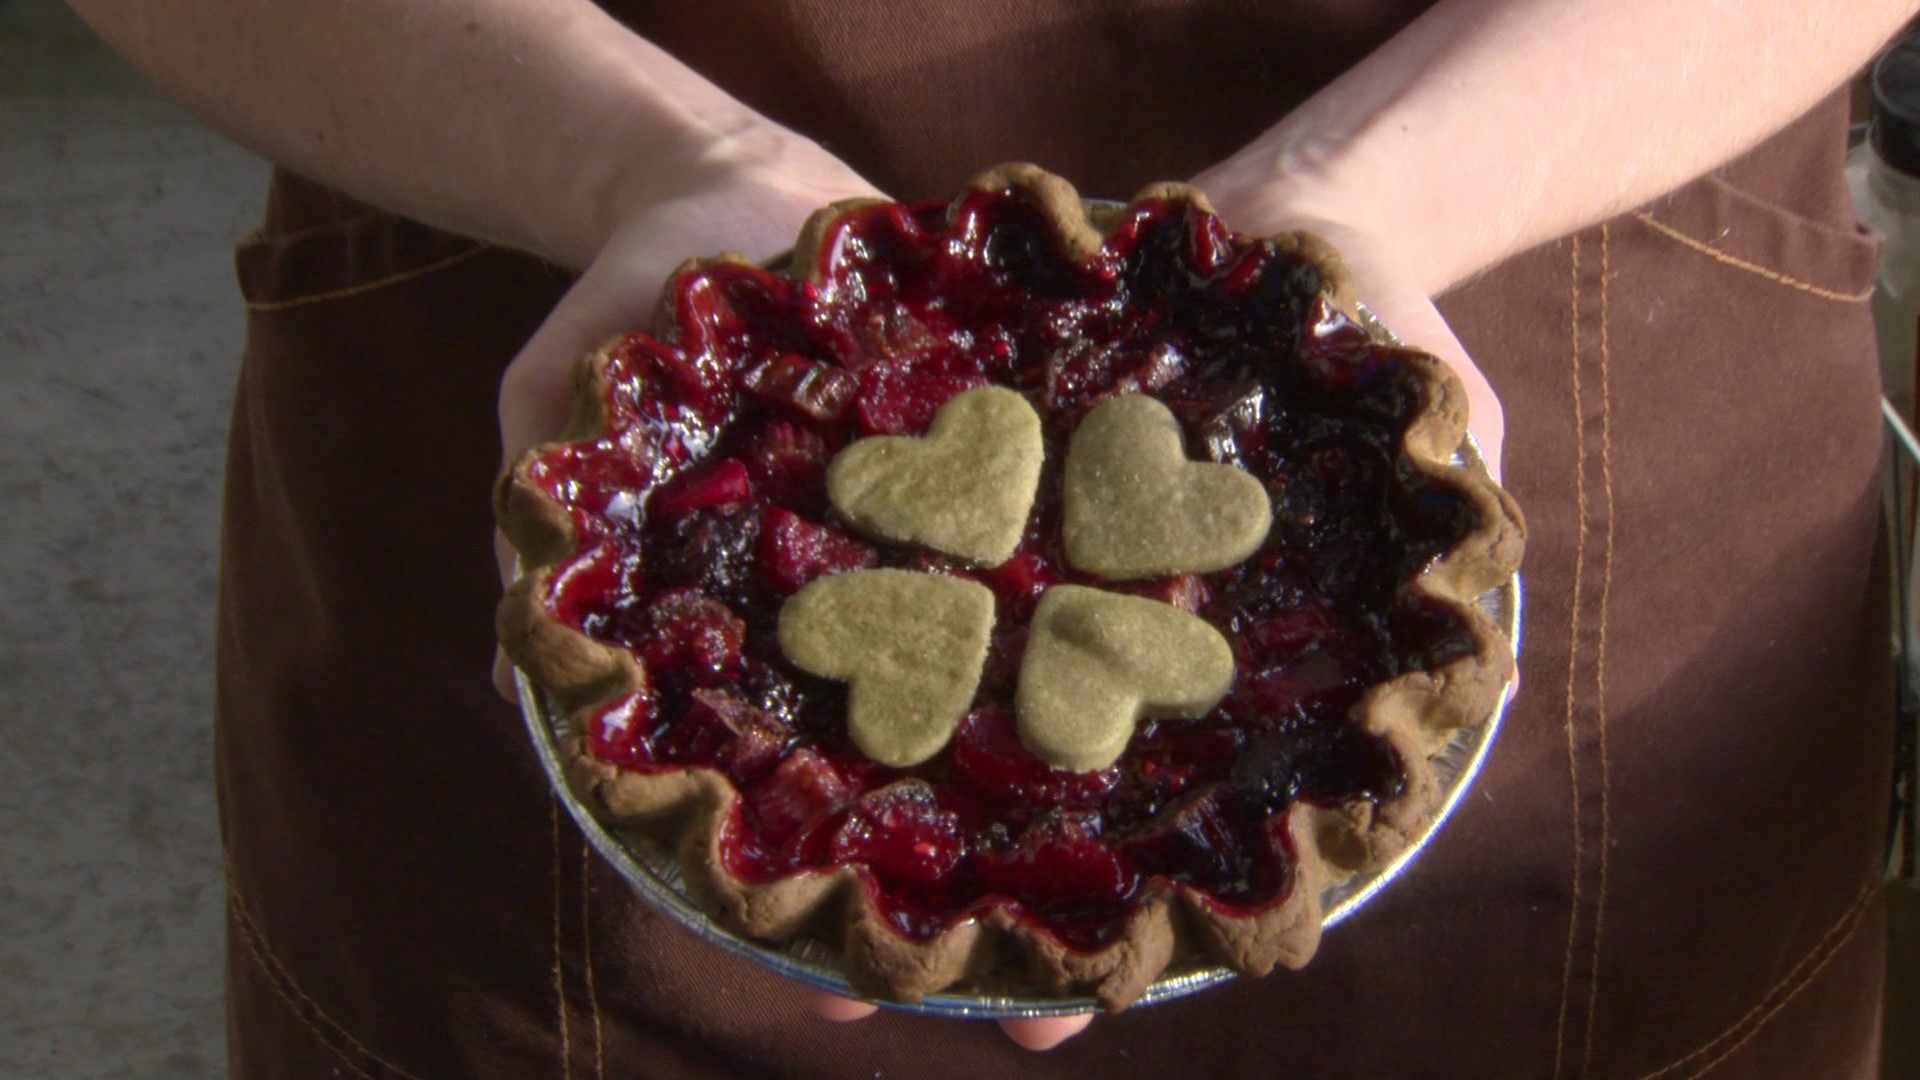 These five pie providers are ready to meet your Pie Day needs. #k5evening